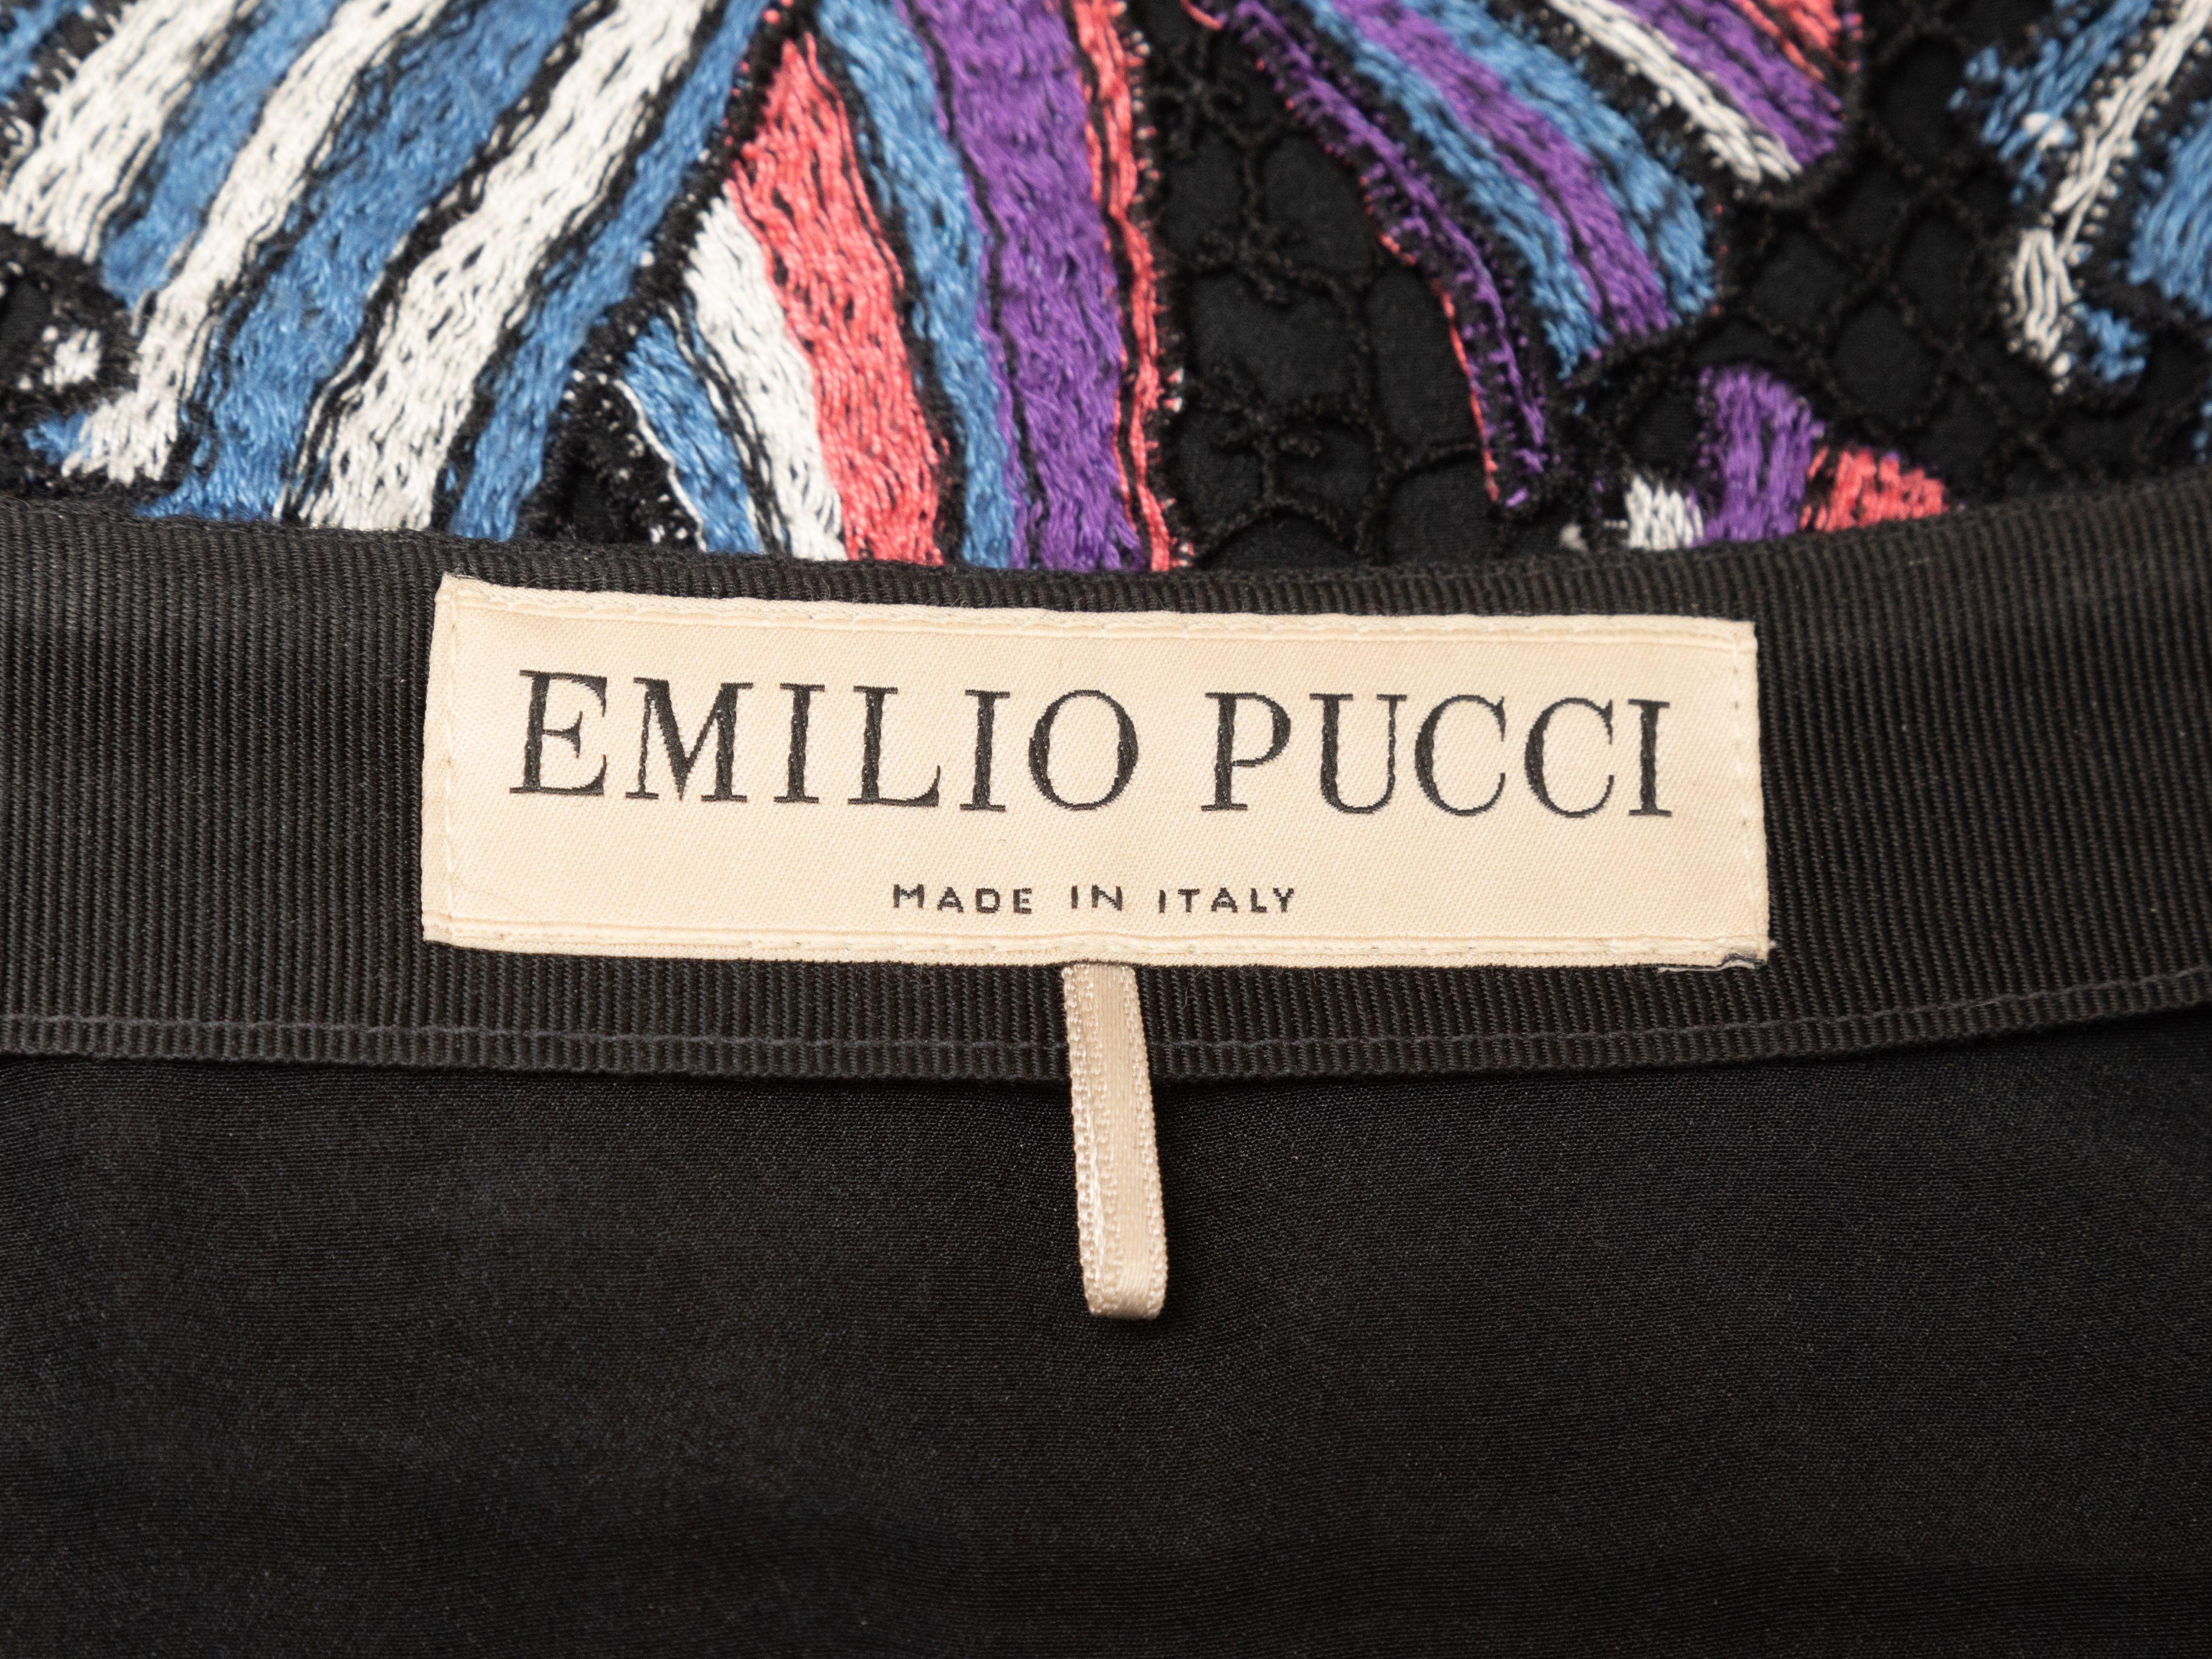 Product Details: Black and multicolor knee-length embroidered skirt by Emilio Pucci. Scalloped hem. Side zip closure. Designer size 38. 26